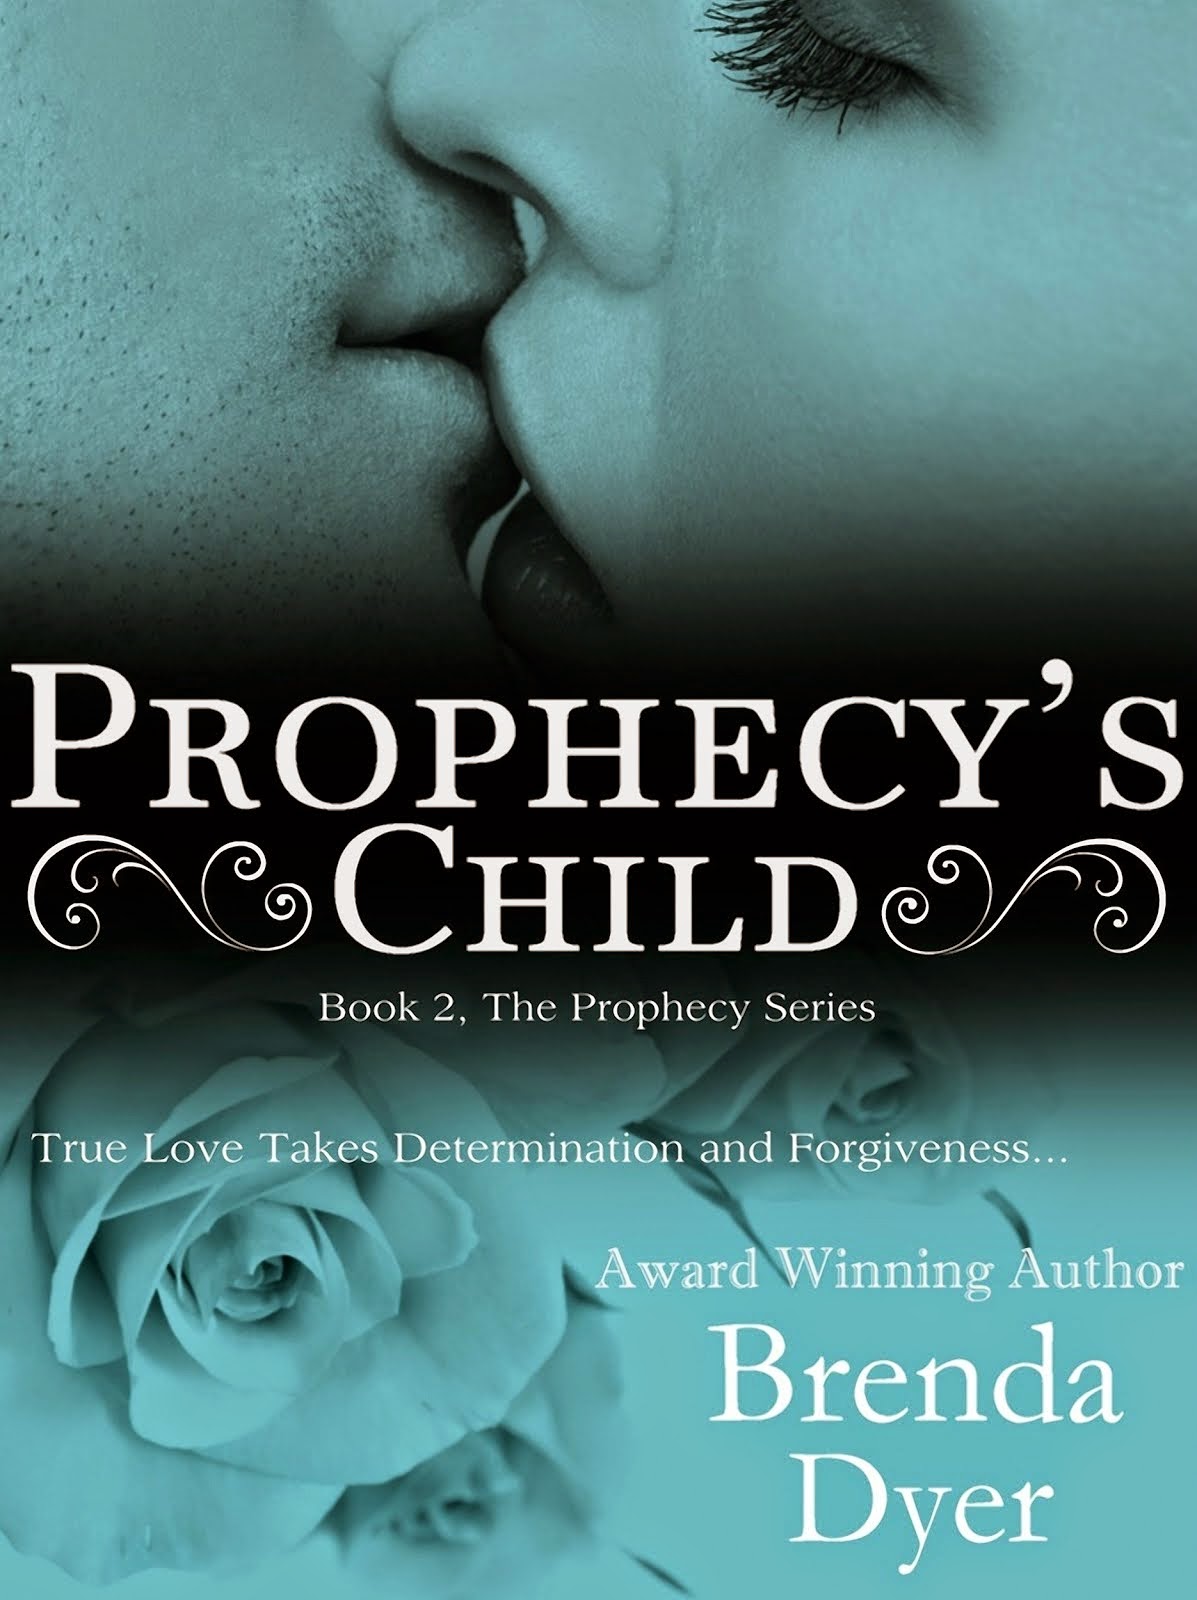 Prophecy's Child, chapter 1